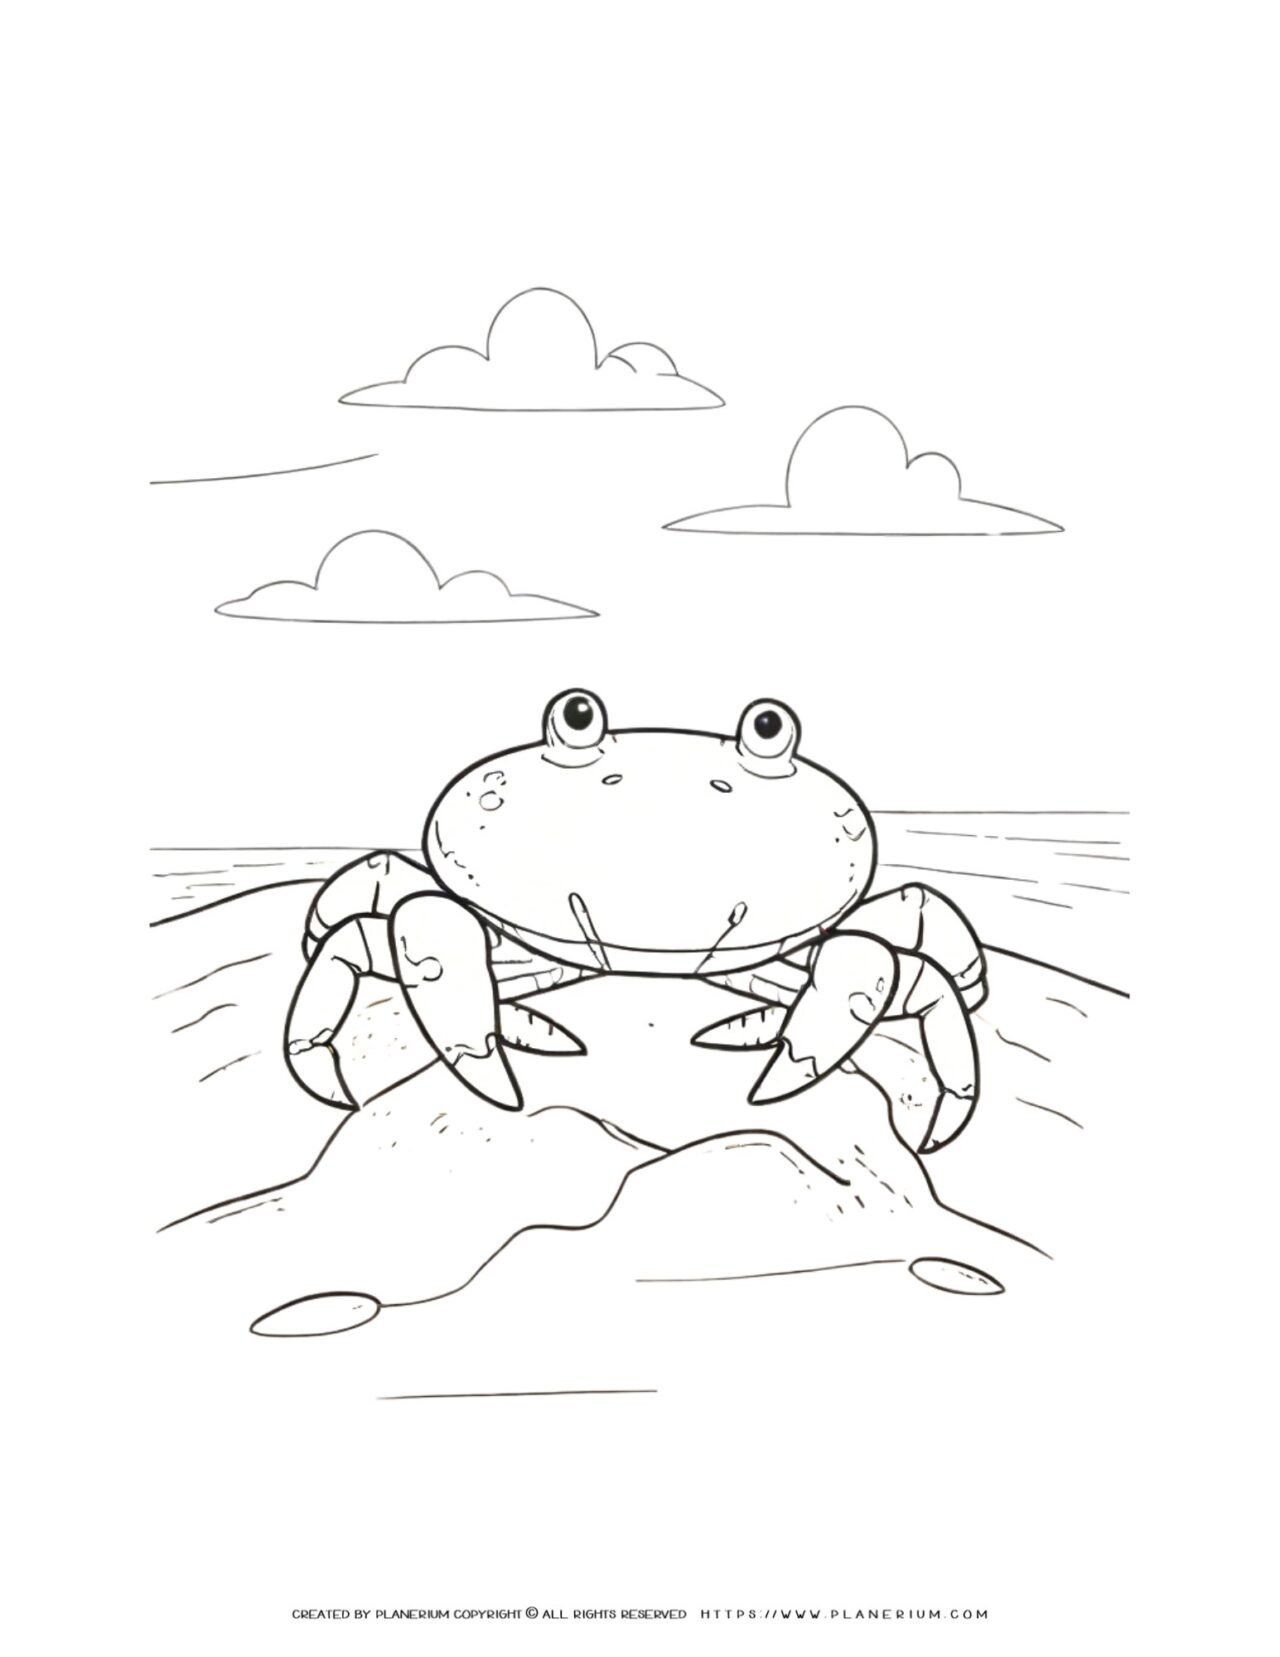 Cartoon-crab-on-beach-coloring-page